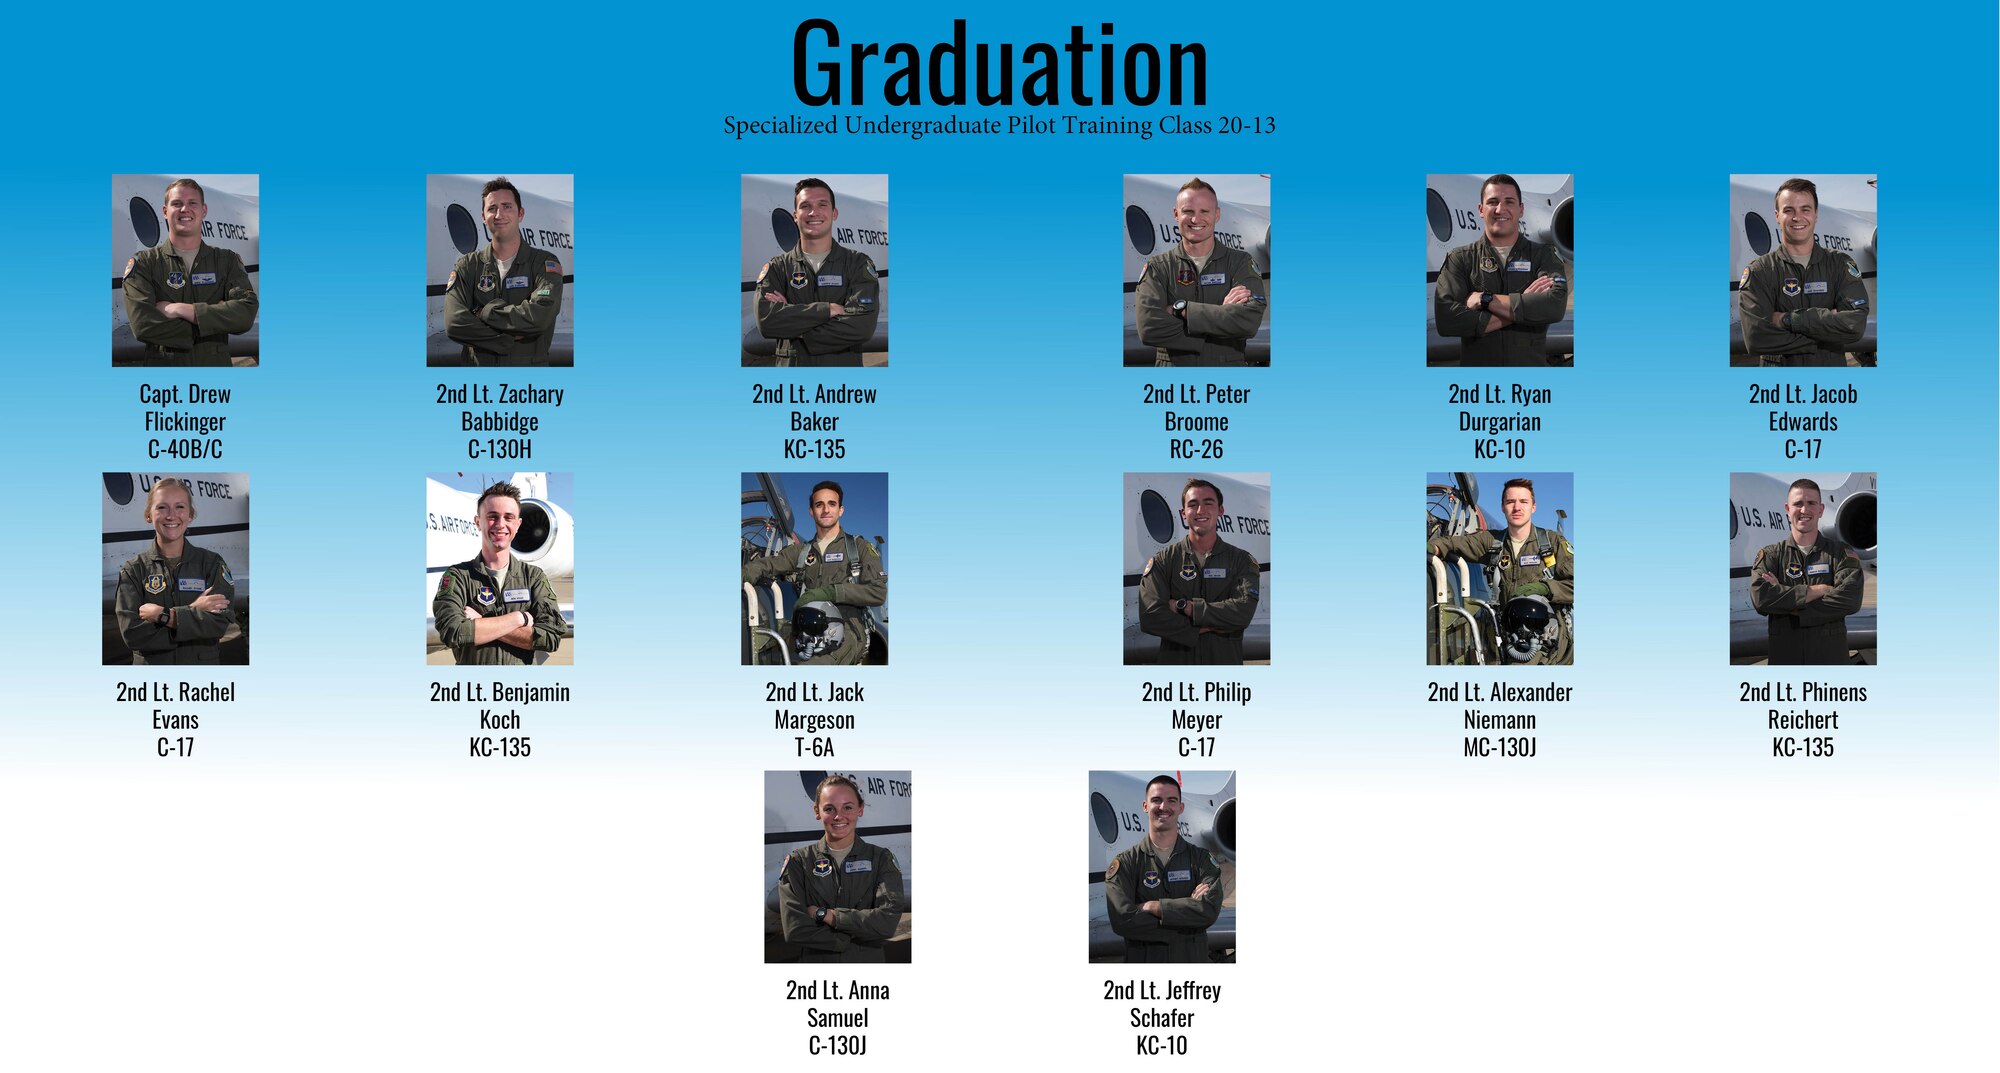 Specialized Undergraduate Pilot Training Class 20-12 and 20-13 are set to graduate after 52 weeks of training at Laughlin Air Force Base, Texas, April 24, 2020. Laughlin is the home of the 47th Flying Training Wing, whose mission is to build combat-ready Airmen, leaders and pilots. (U.S. Air Force graphic by Senior Airman Marco A. Gomez)